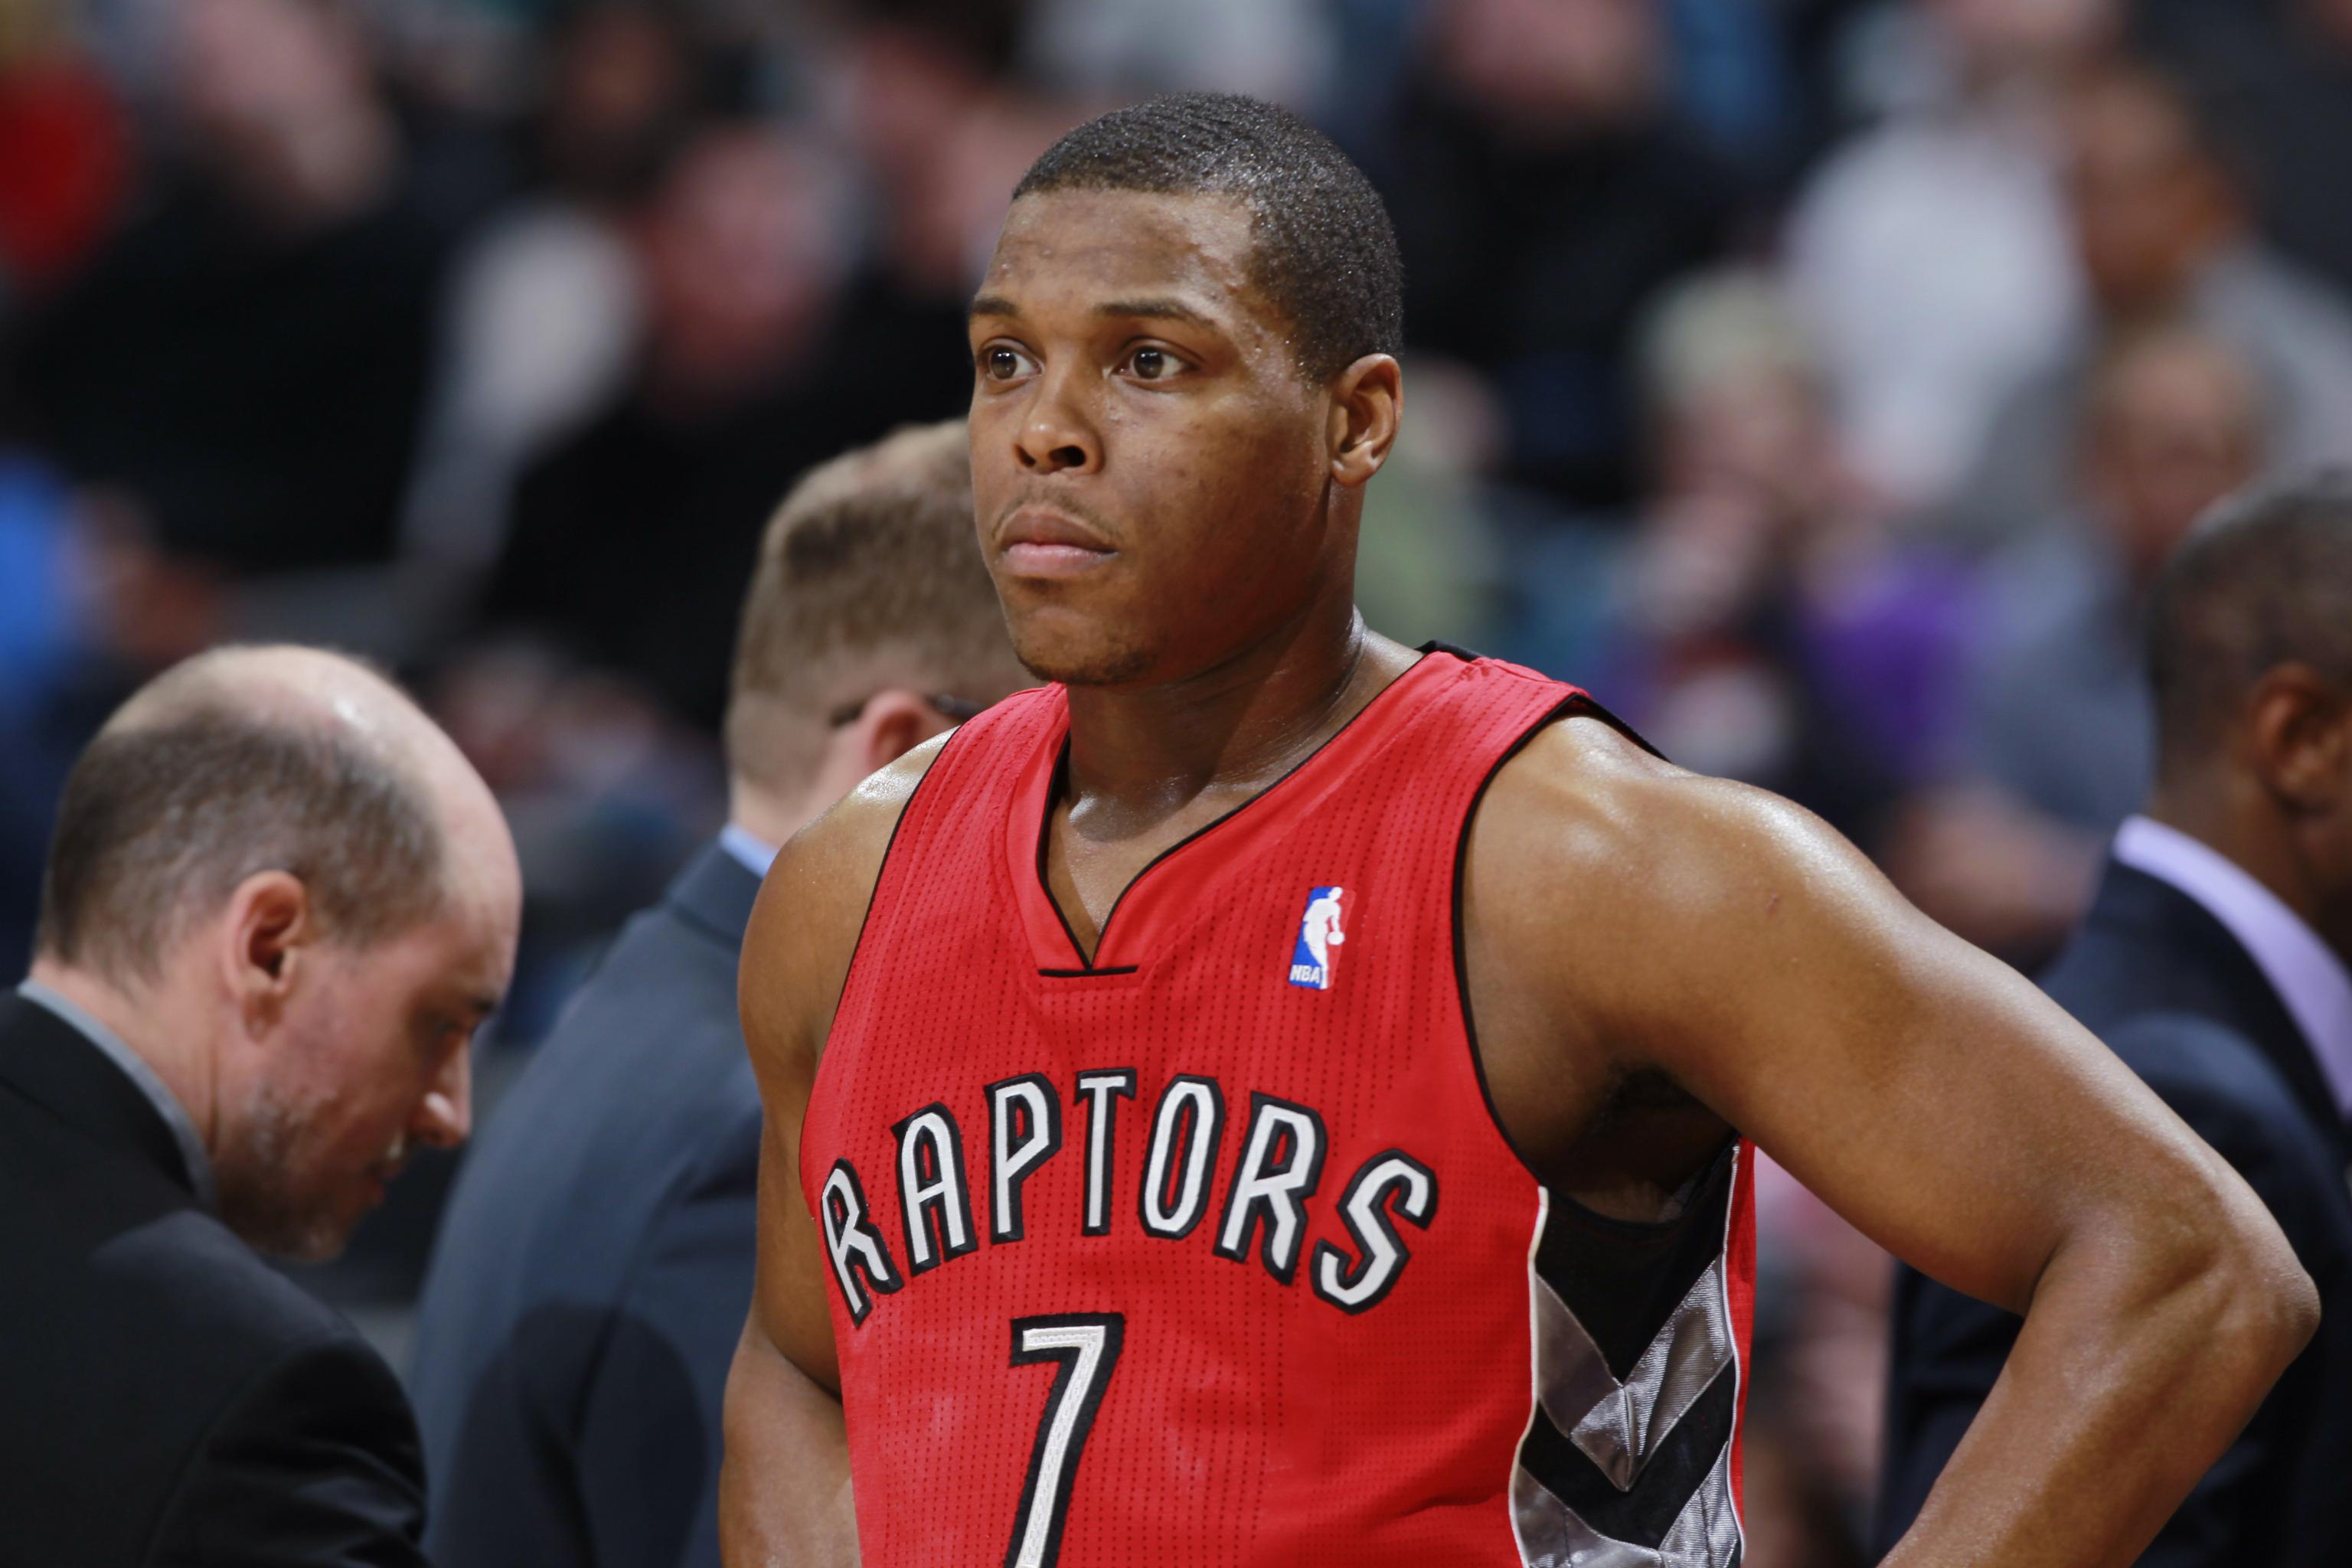 Raptors, Lowry chase second title